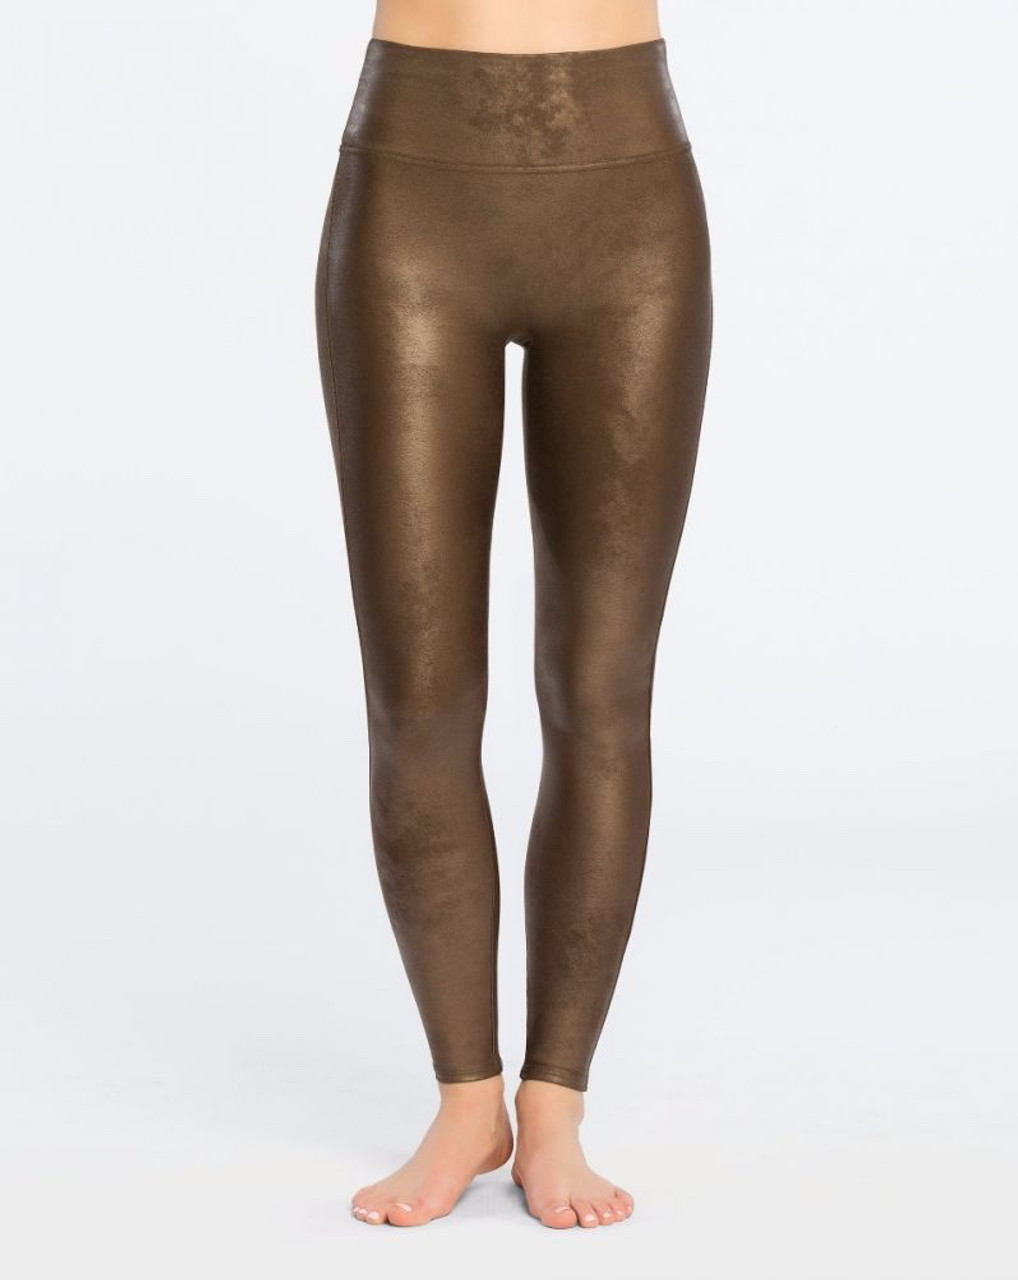 Shop /Pants SPANX Ready To Wow - Faux Leather Leggings Discounted